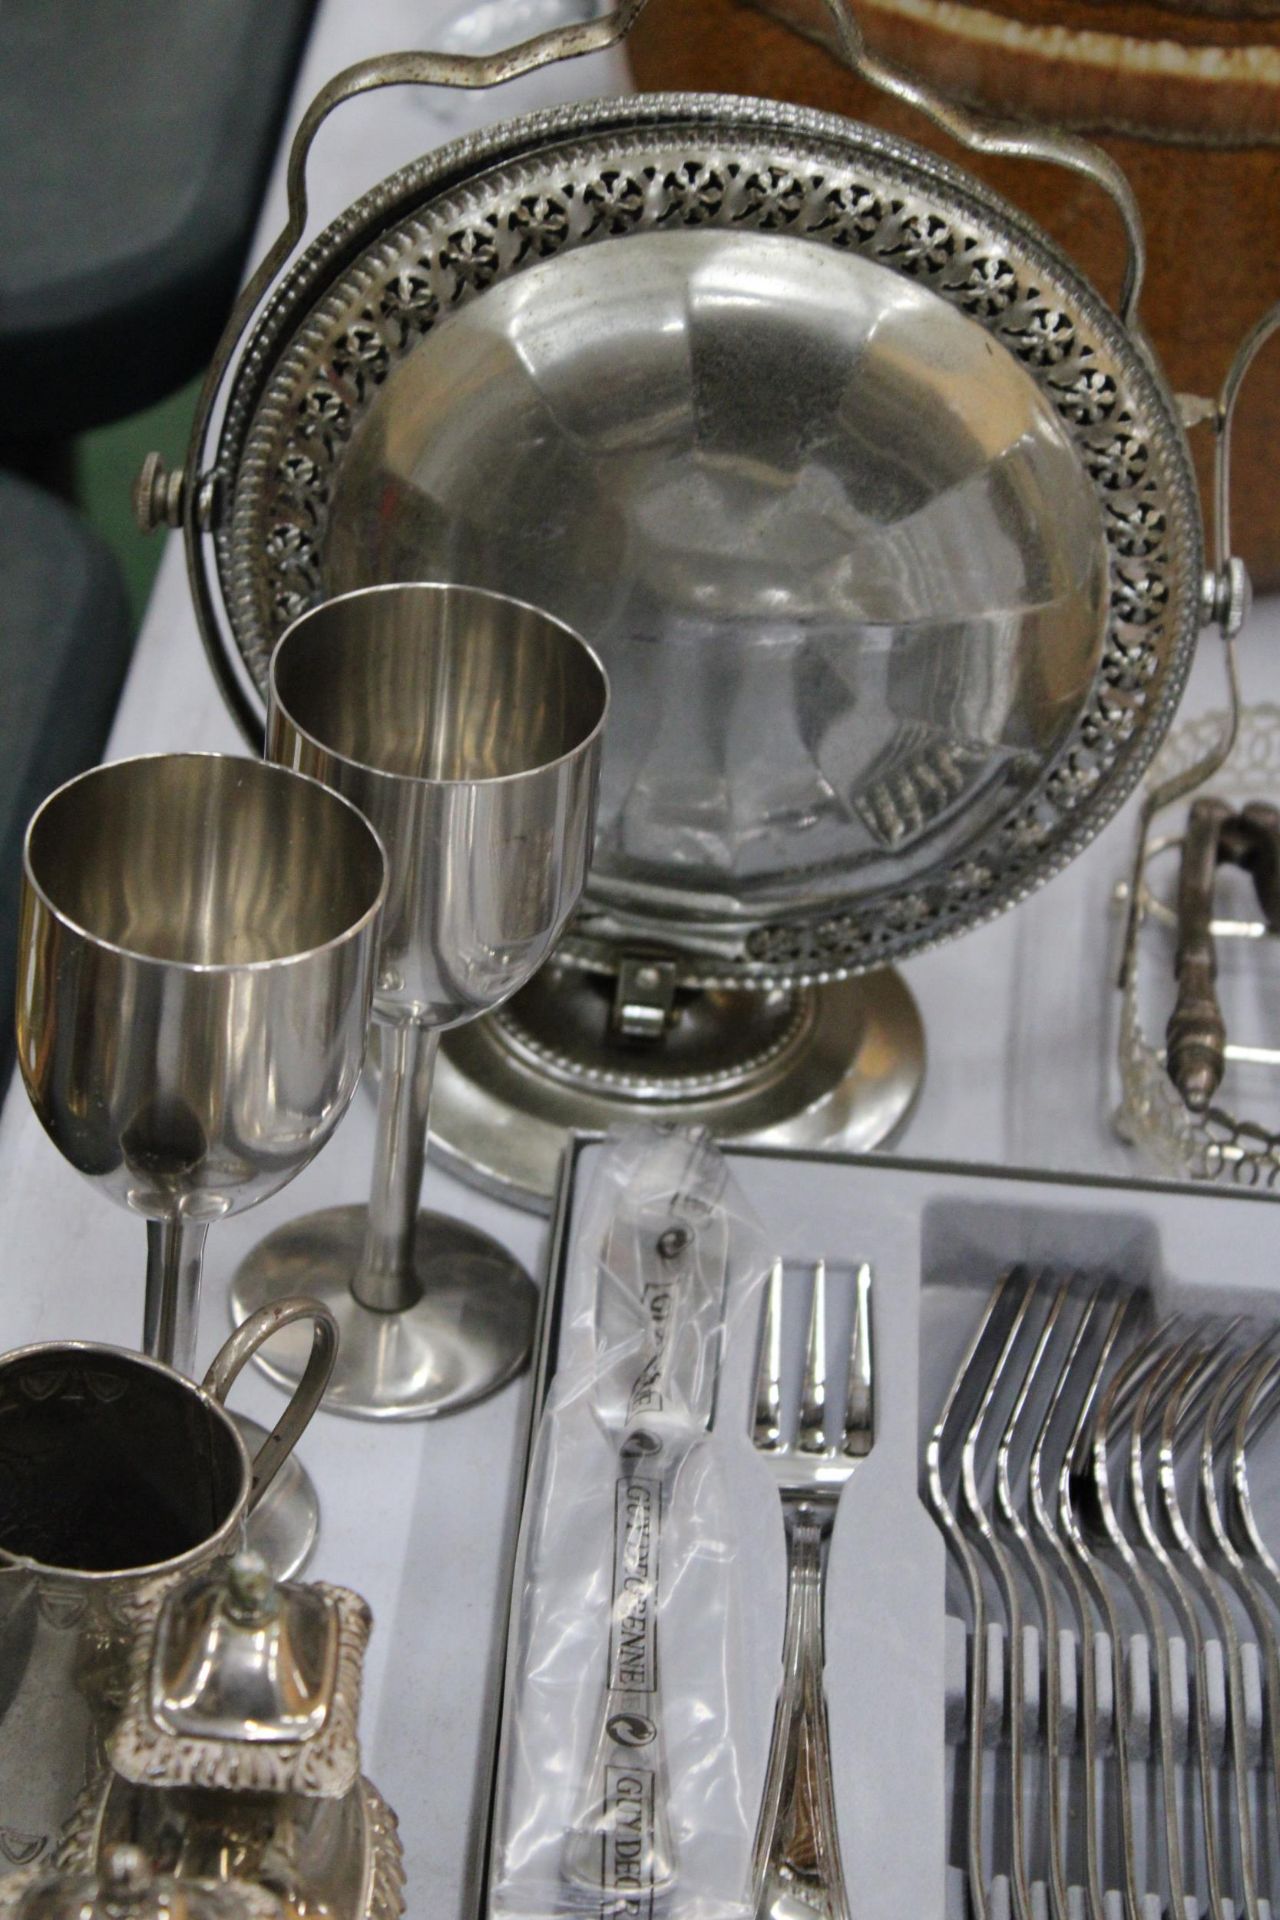 A QUANTITY OF SILVER PLATED AND METAL ITEMS TO INCLUDE GOBLETS, A CRUET SET, DISHES, FLATWARE, ETC - Image 2 of 5